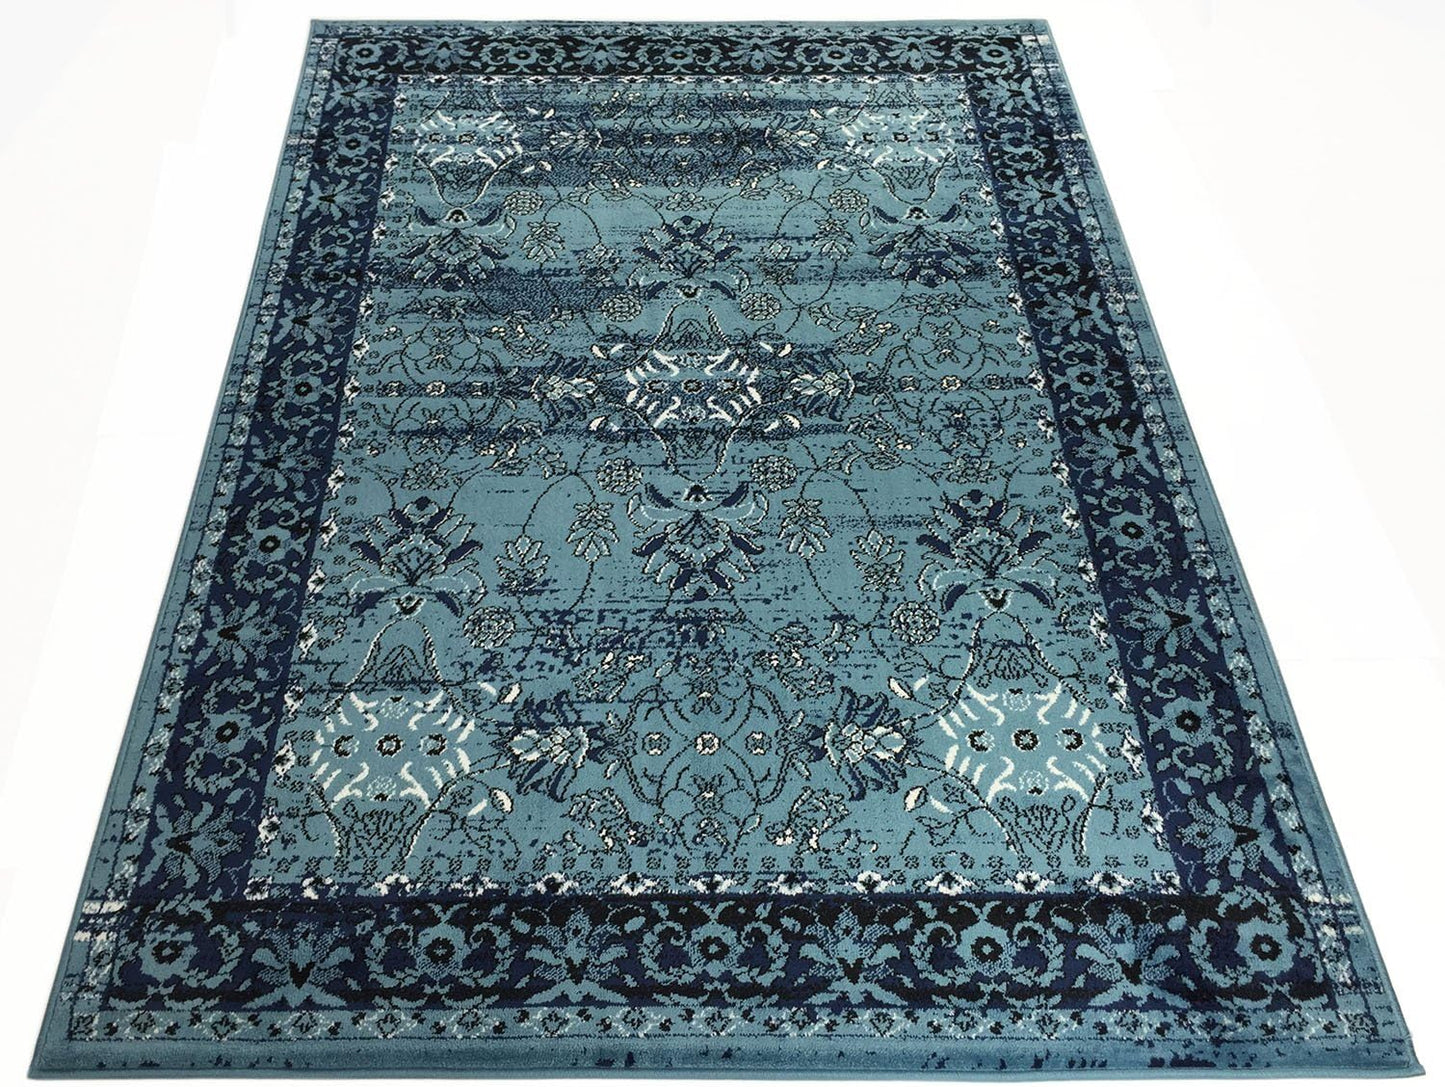 Comfy Collection Vintage Mahal Design Area Rug Oriental Traditional Antique Look (Teal Blue, 4'11" x 6'11")